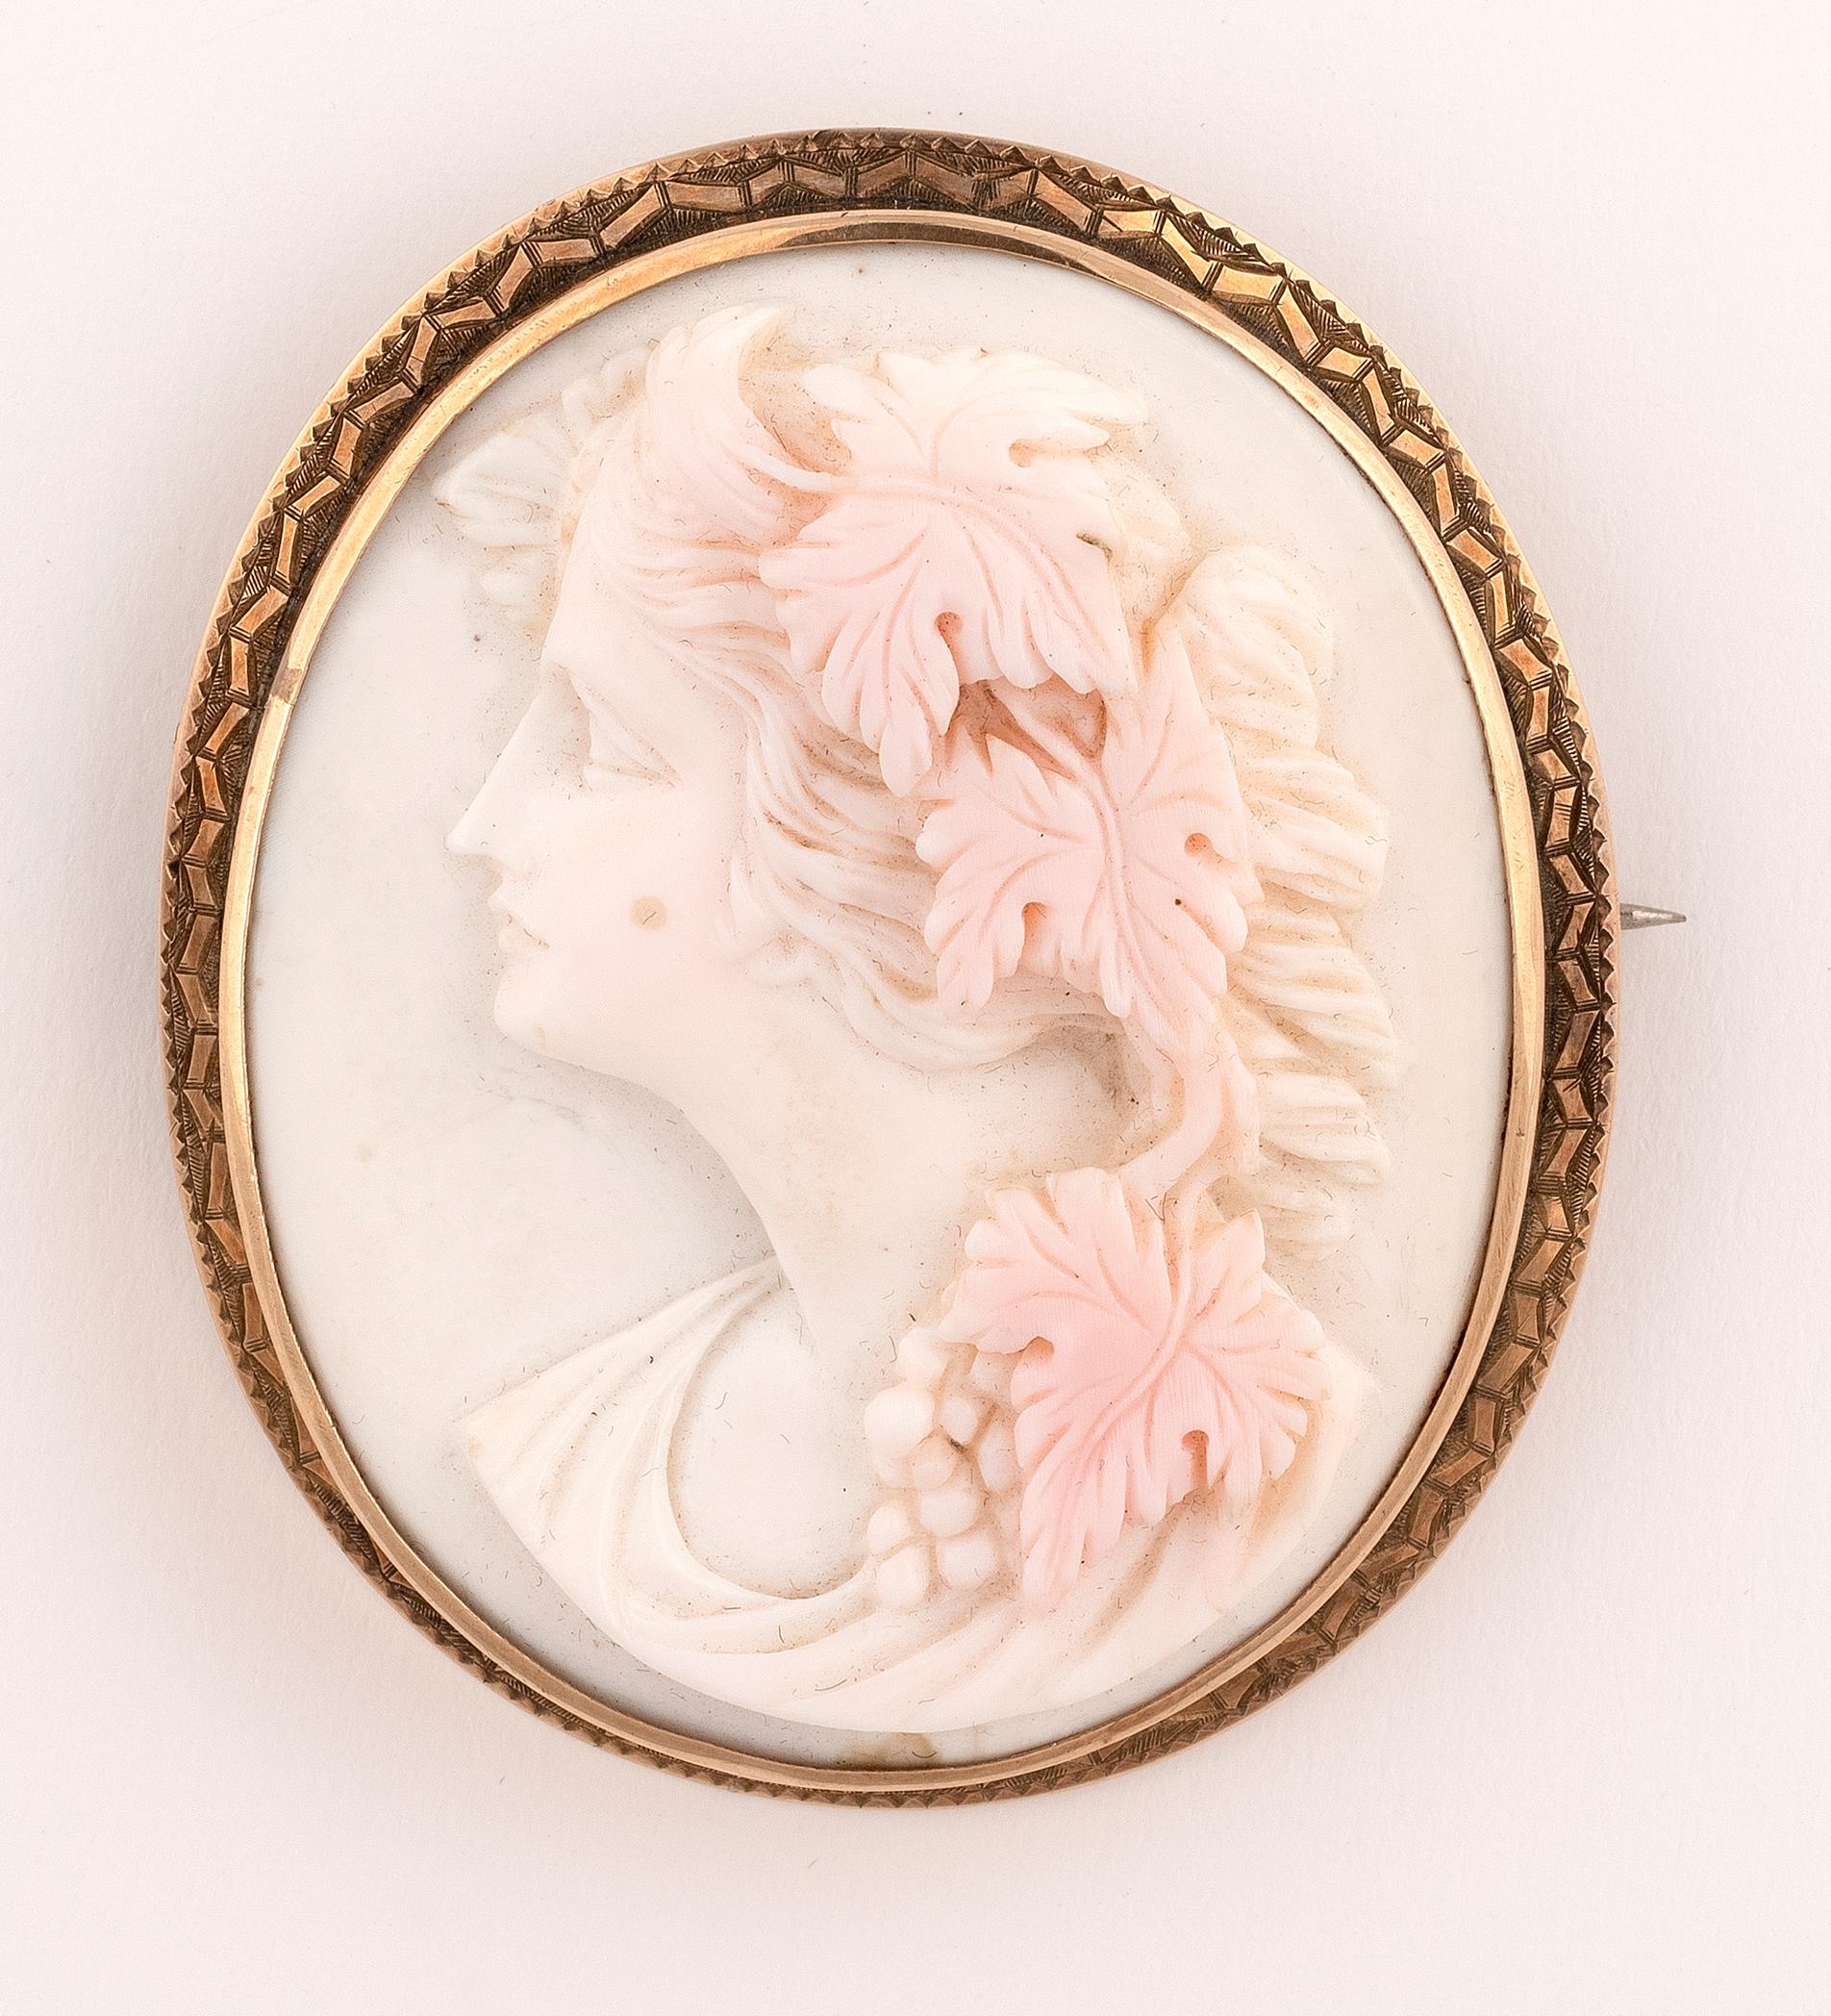 The coral carved to depict Bacchante within an gold frame, length 6.0cm.

